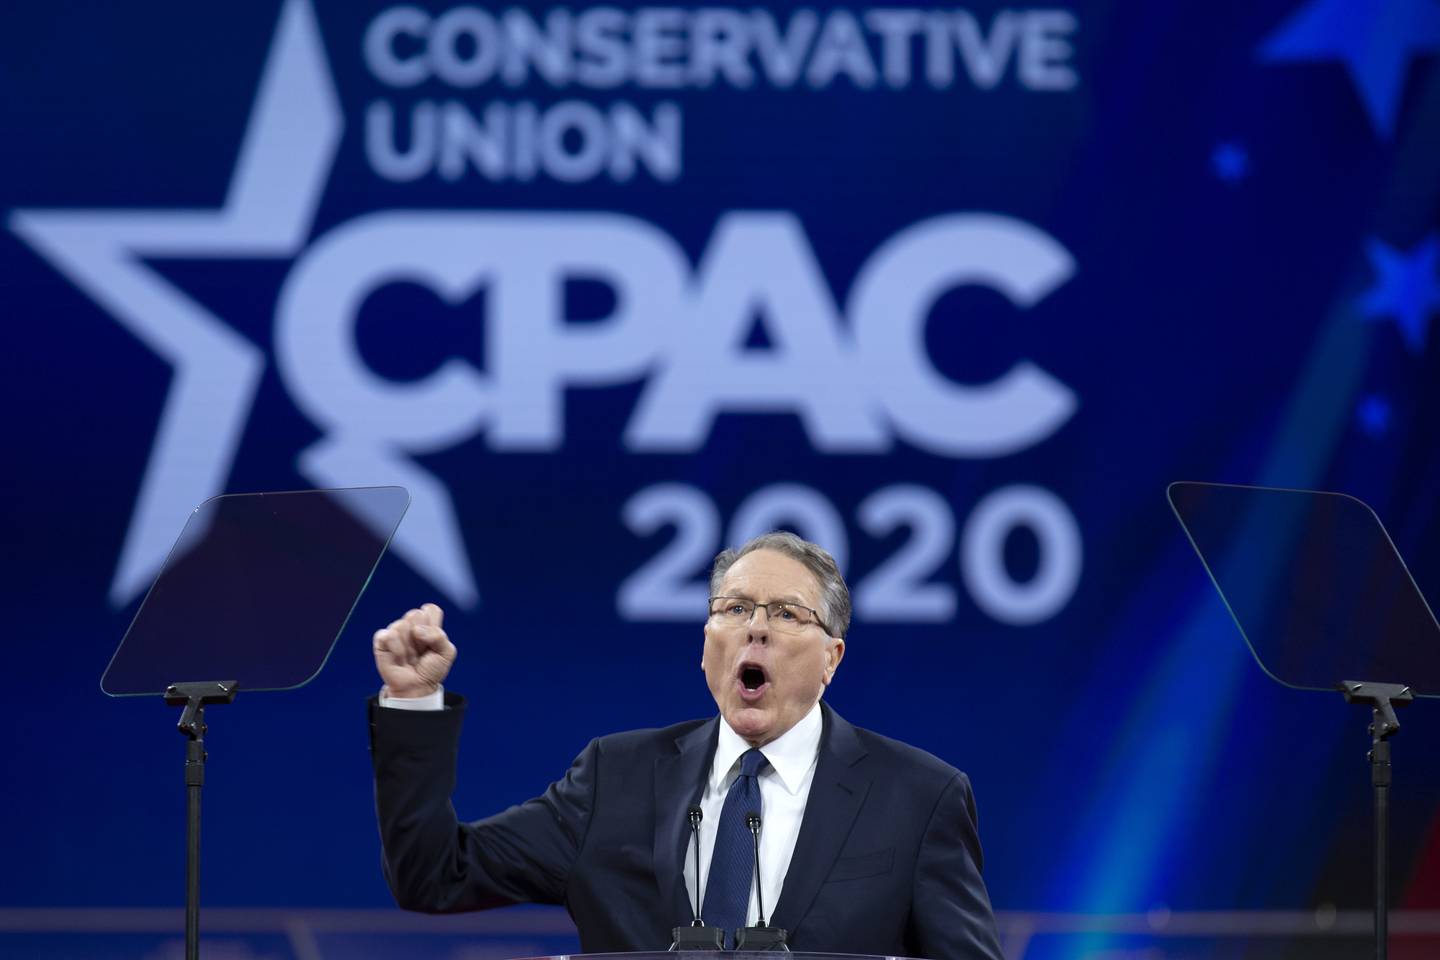 National Rifle Association Executive Vice President and CEO Wayne LaPierre speaks at Conservative Political Action Conference, CPAC 2020, at the National Harbor, in Oxon Hill, Md., Saturday, Feb. 29, 2020. (AP Photo/Jose Luis Magana)